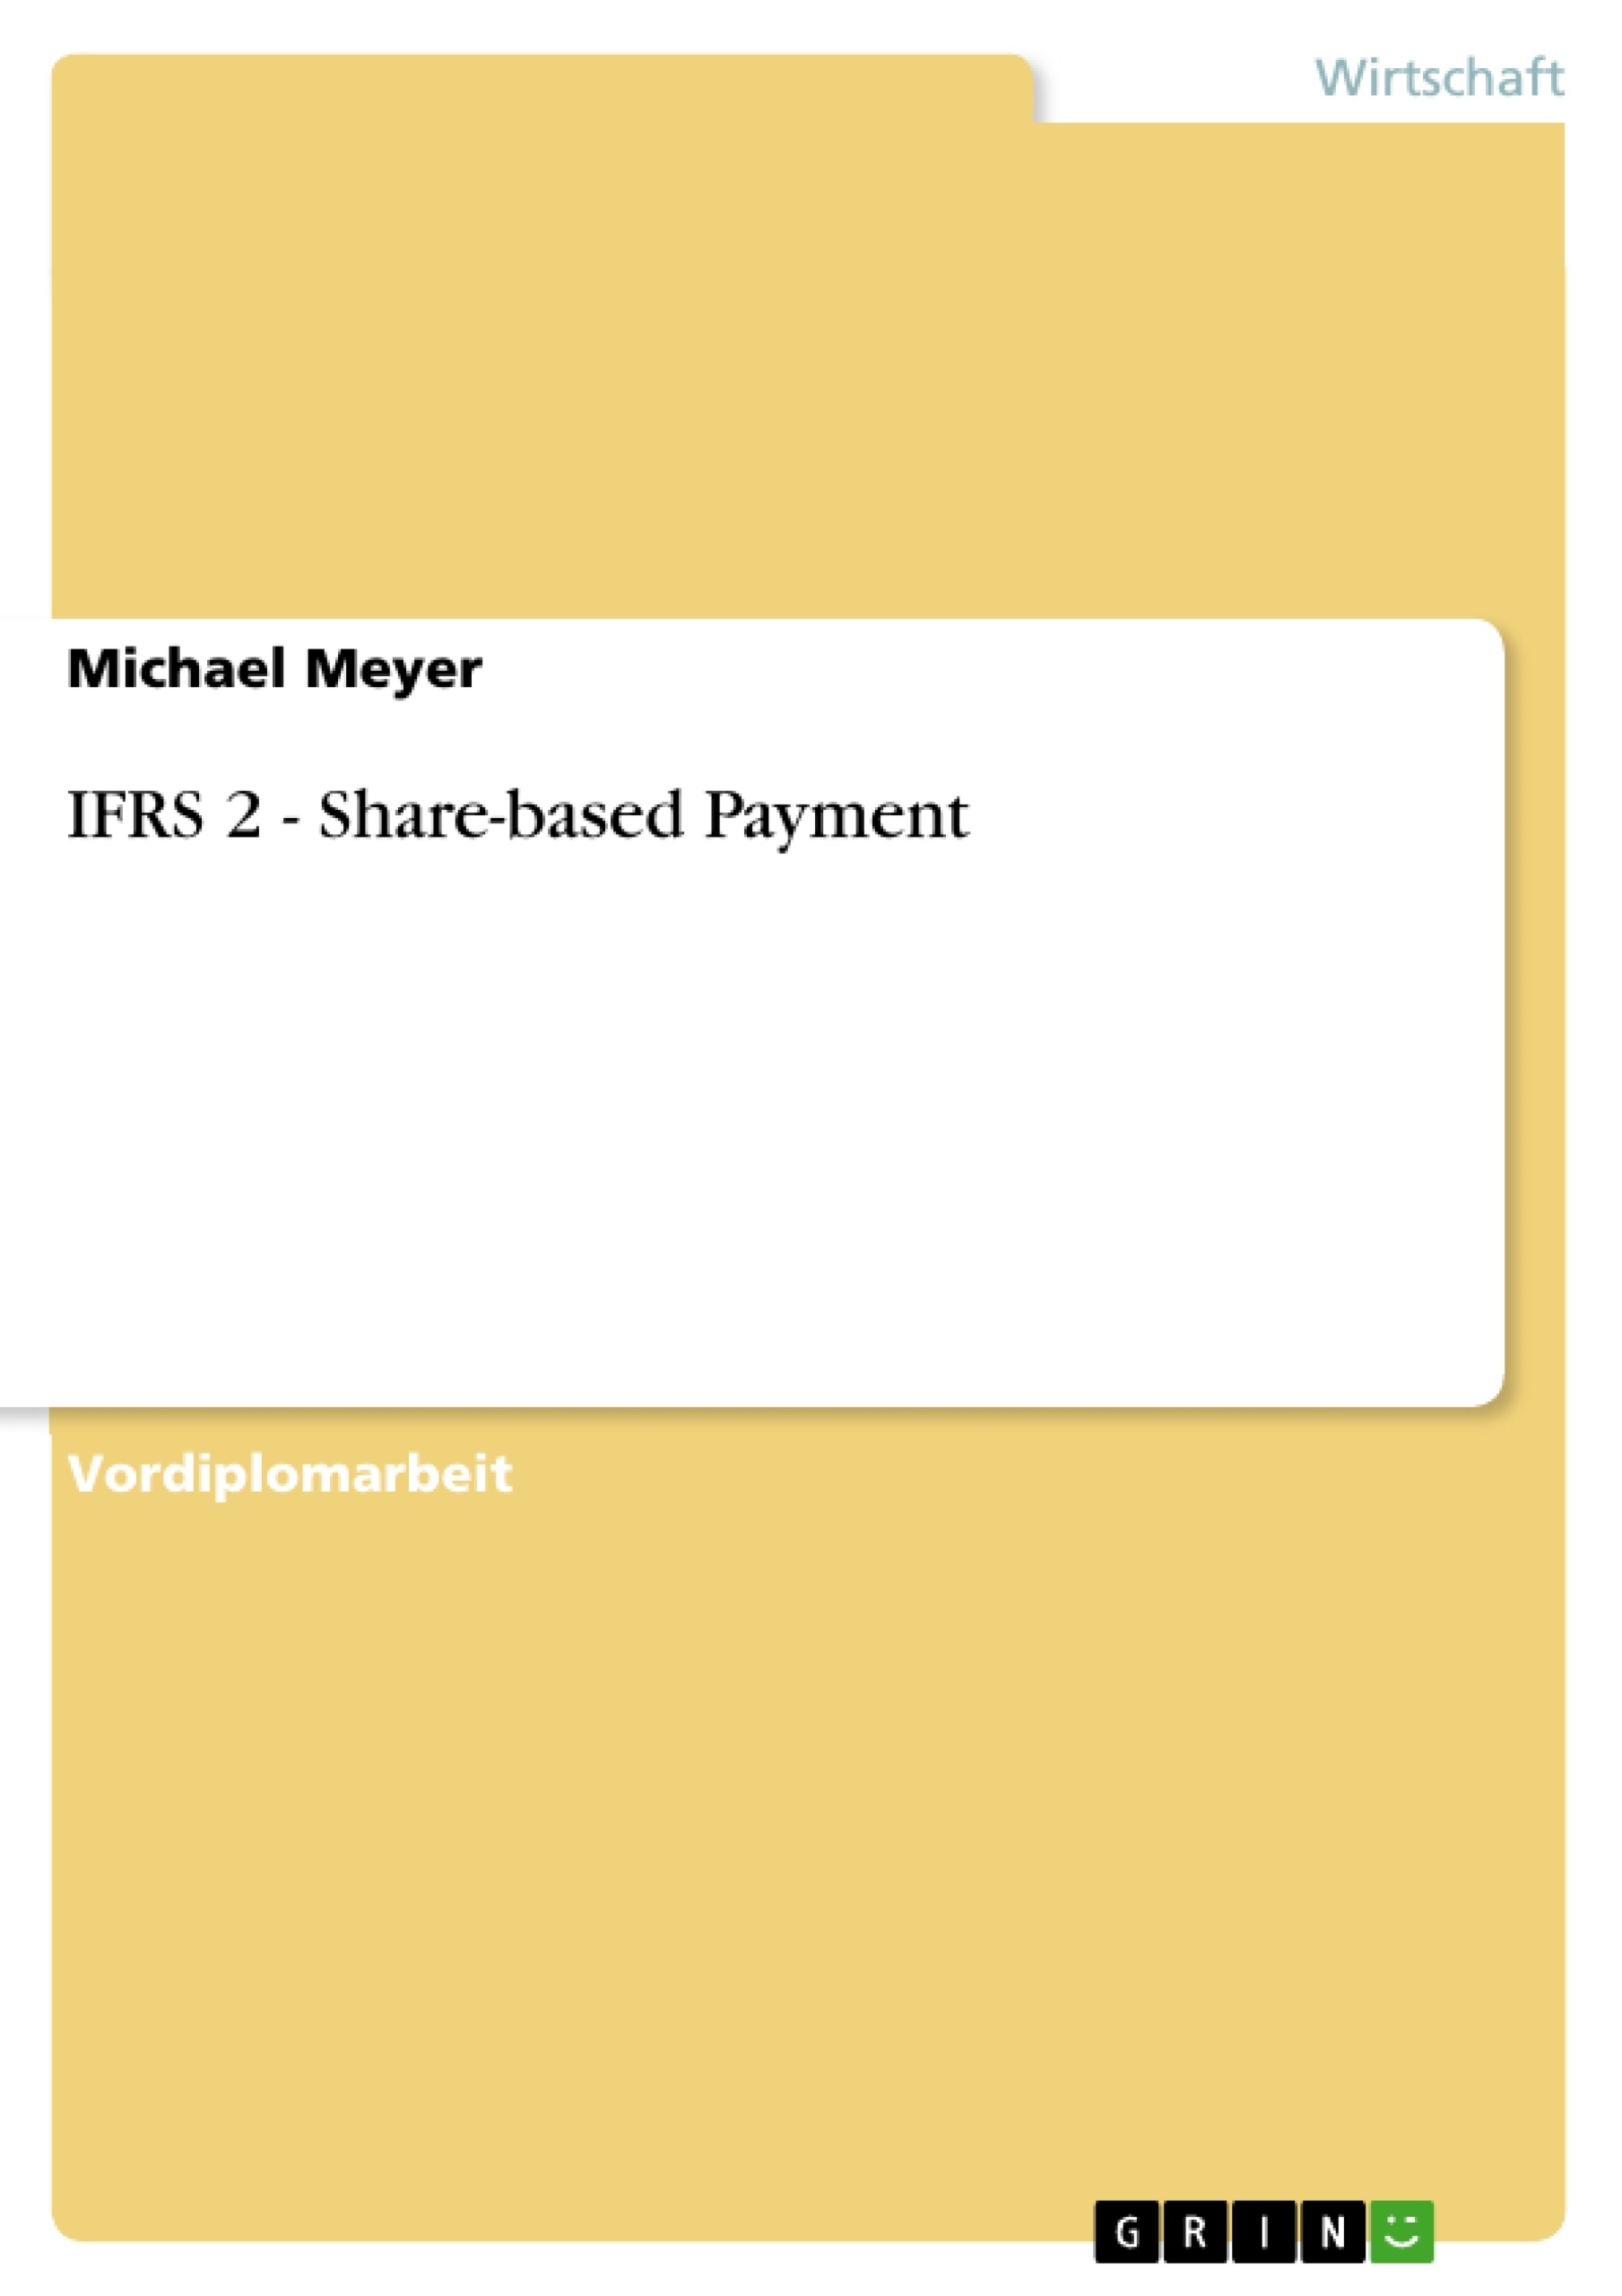 Titel: IFRS 2 - Share-based Payment